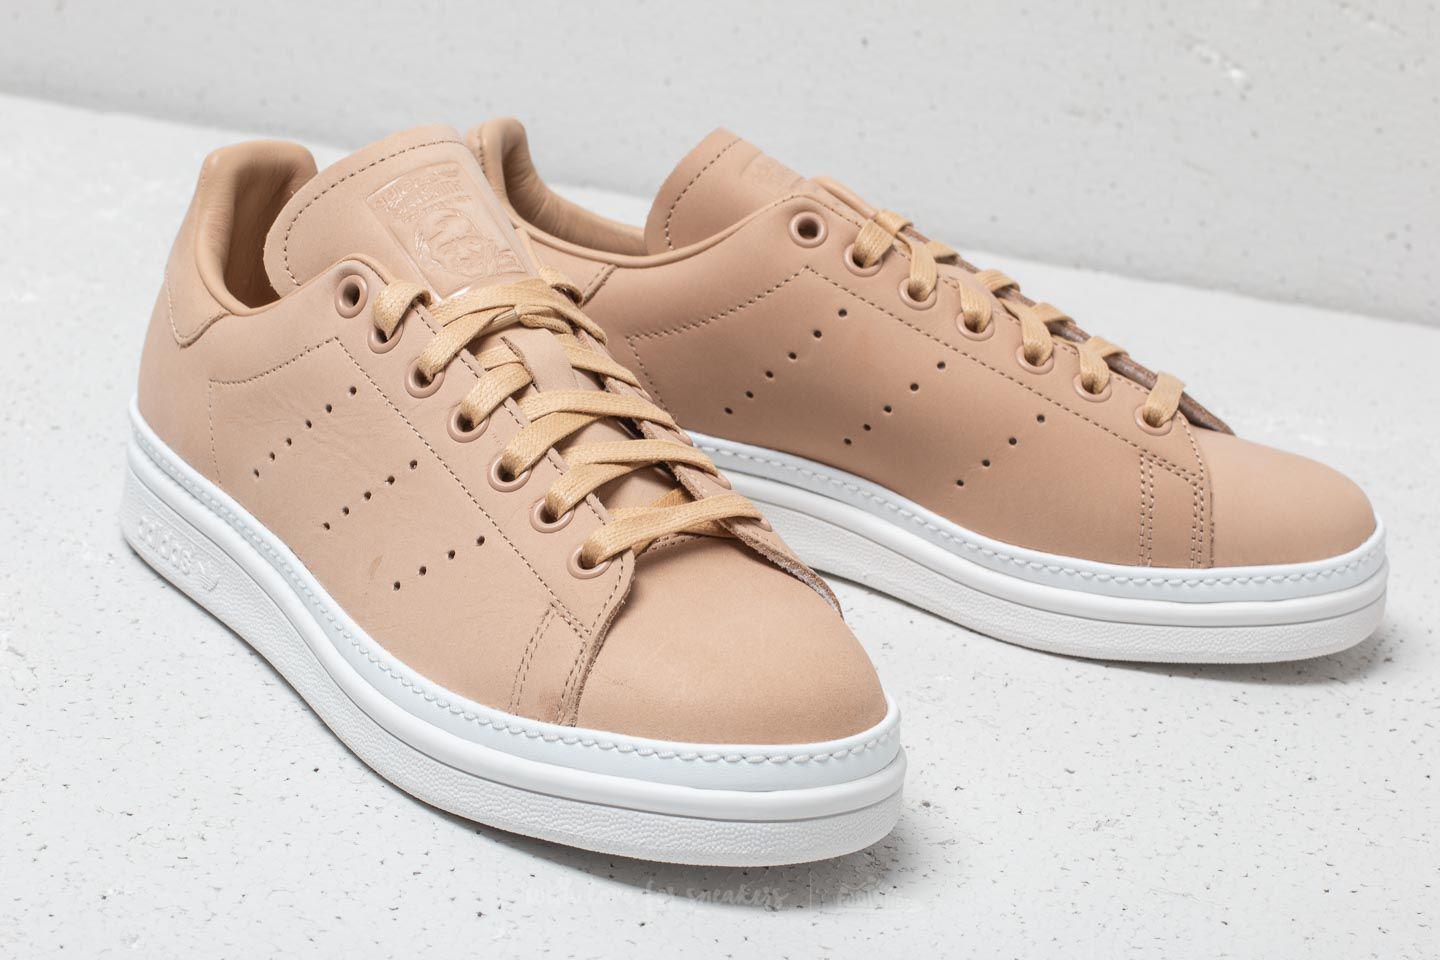 adidas Originals Leather Adidas Stan Smith New Bold W St Pale Nude/ St Pale  Nude/ Ftw White in Natural - Lyst